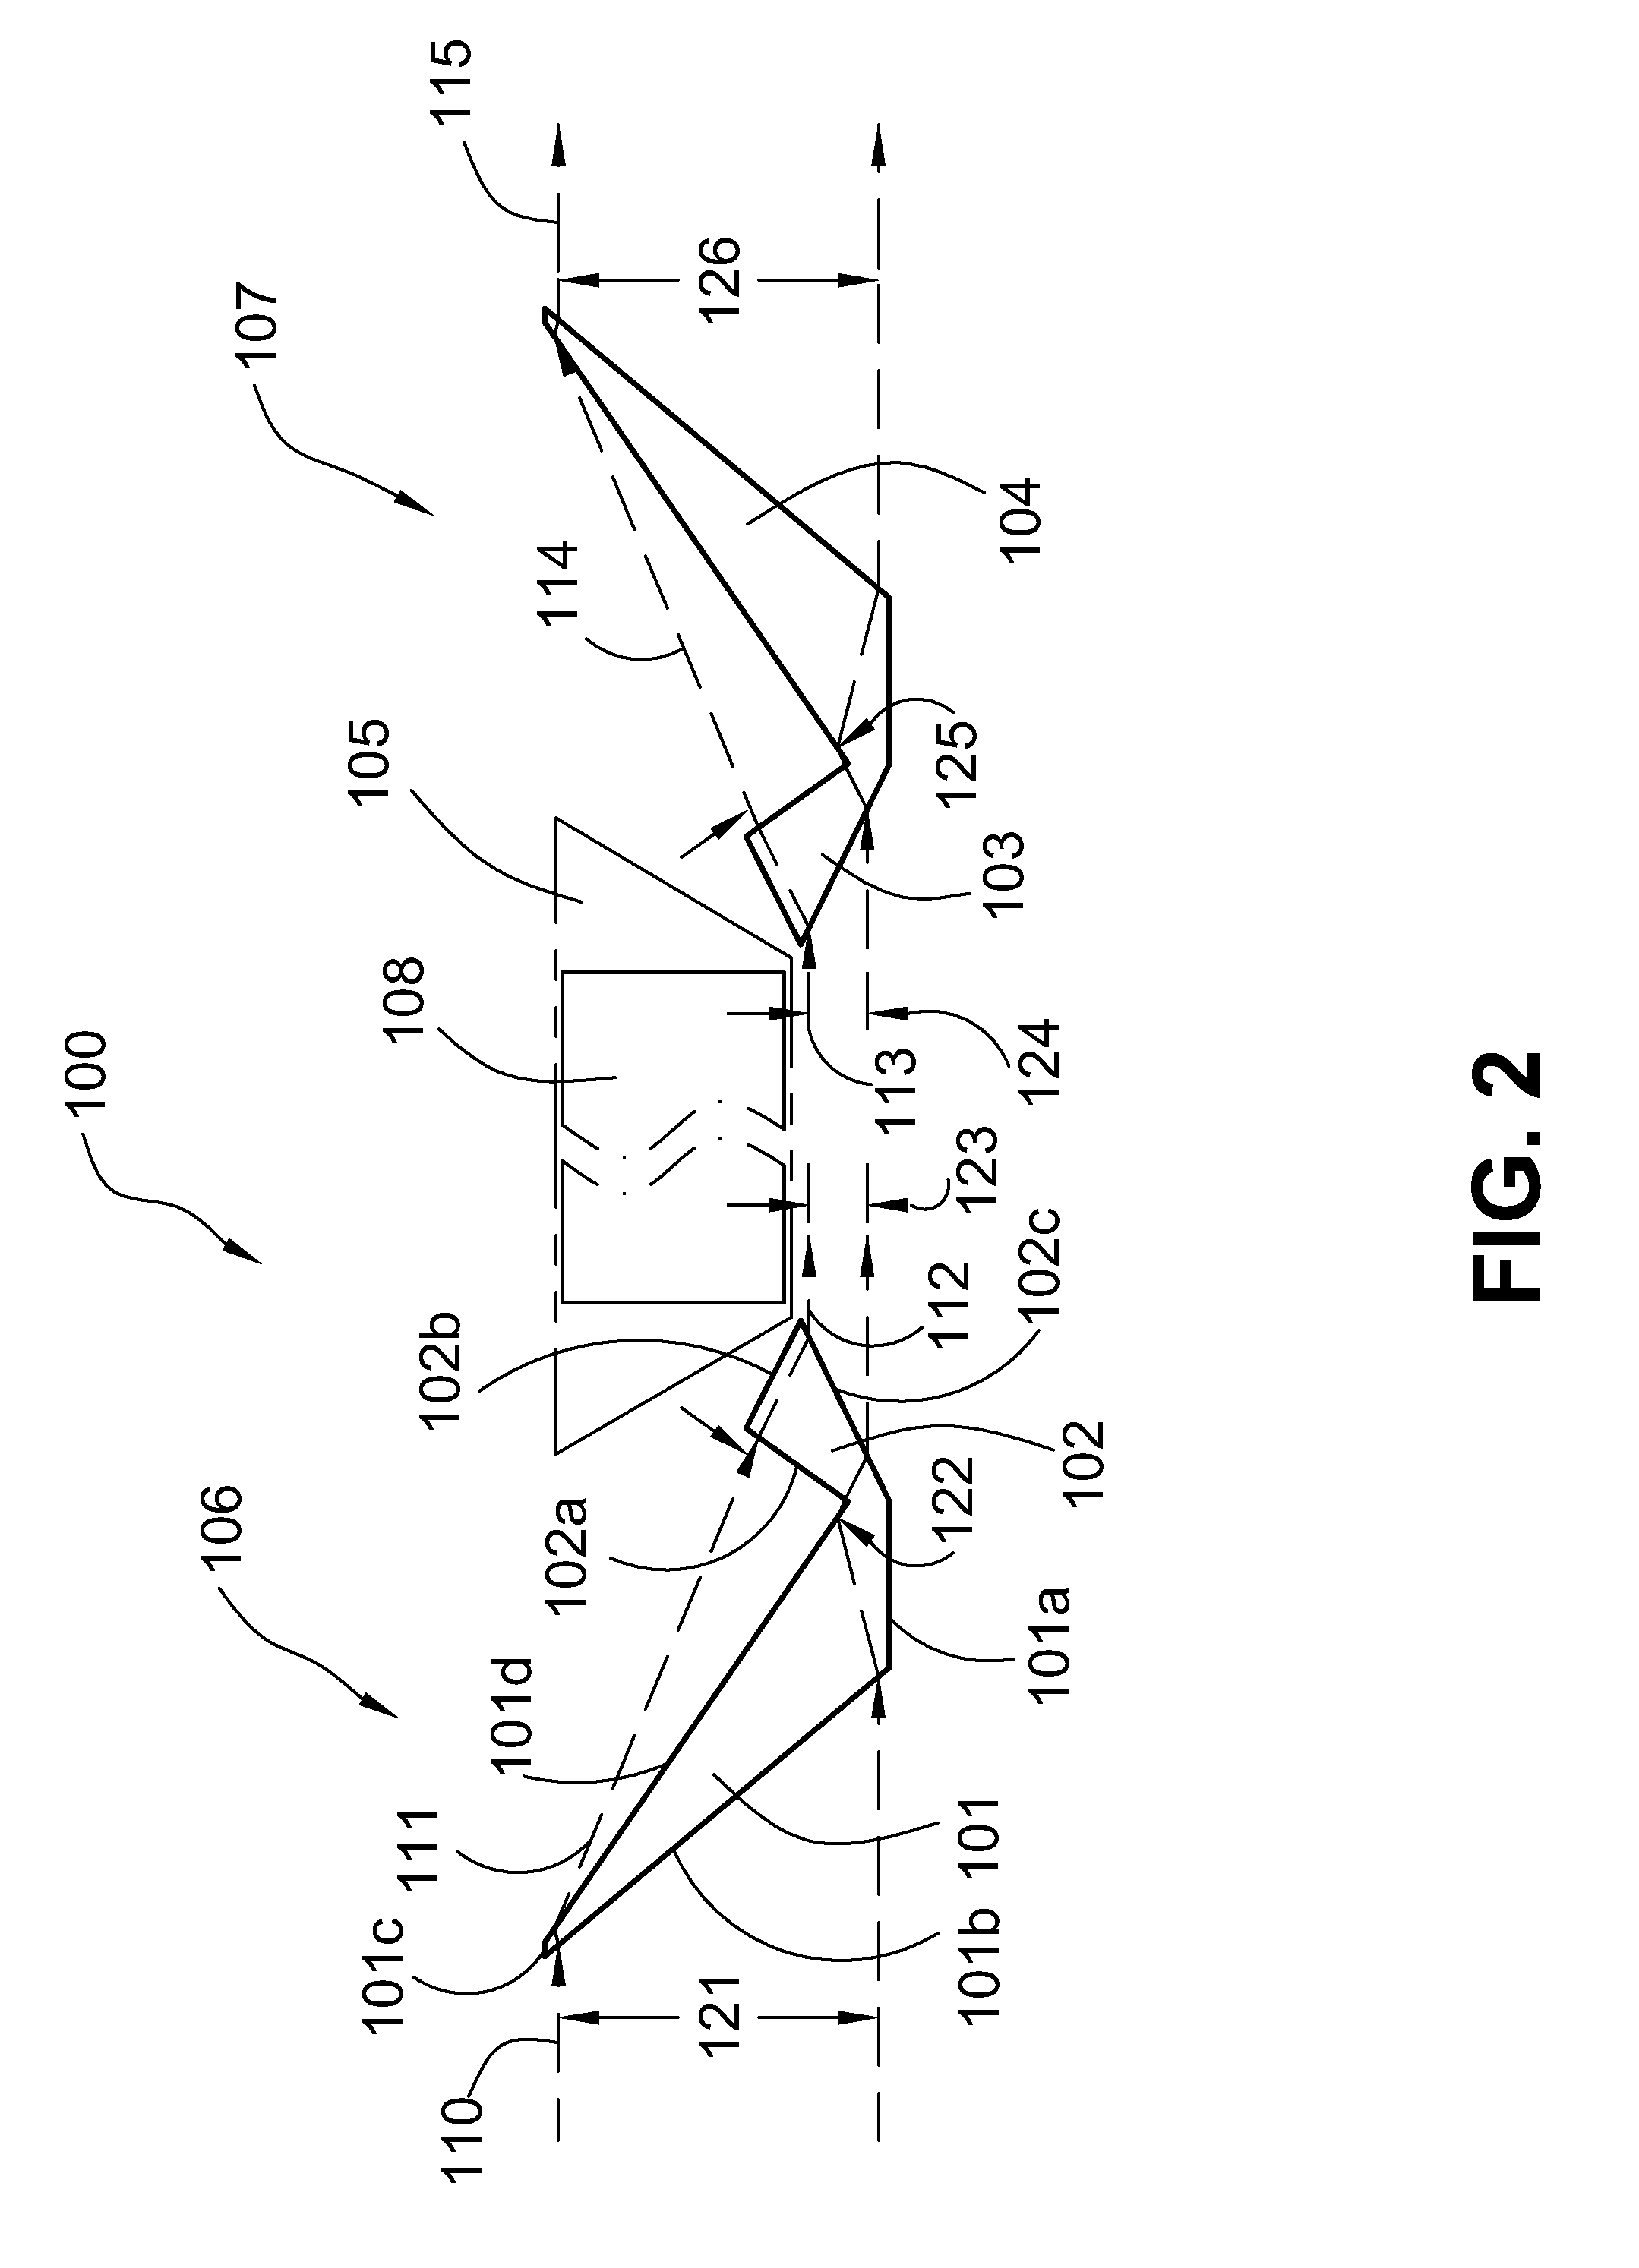 Optical cloaking system